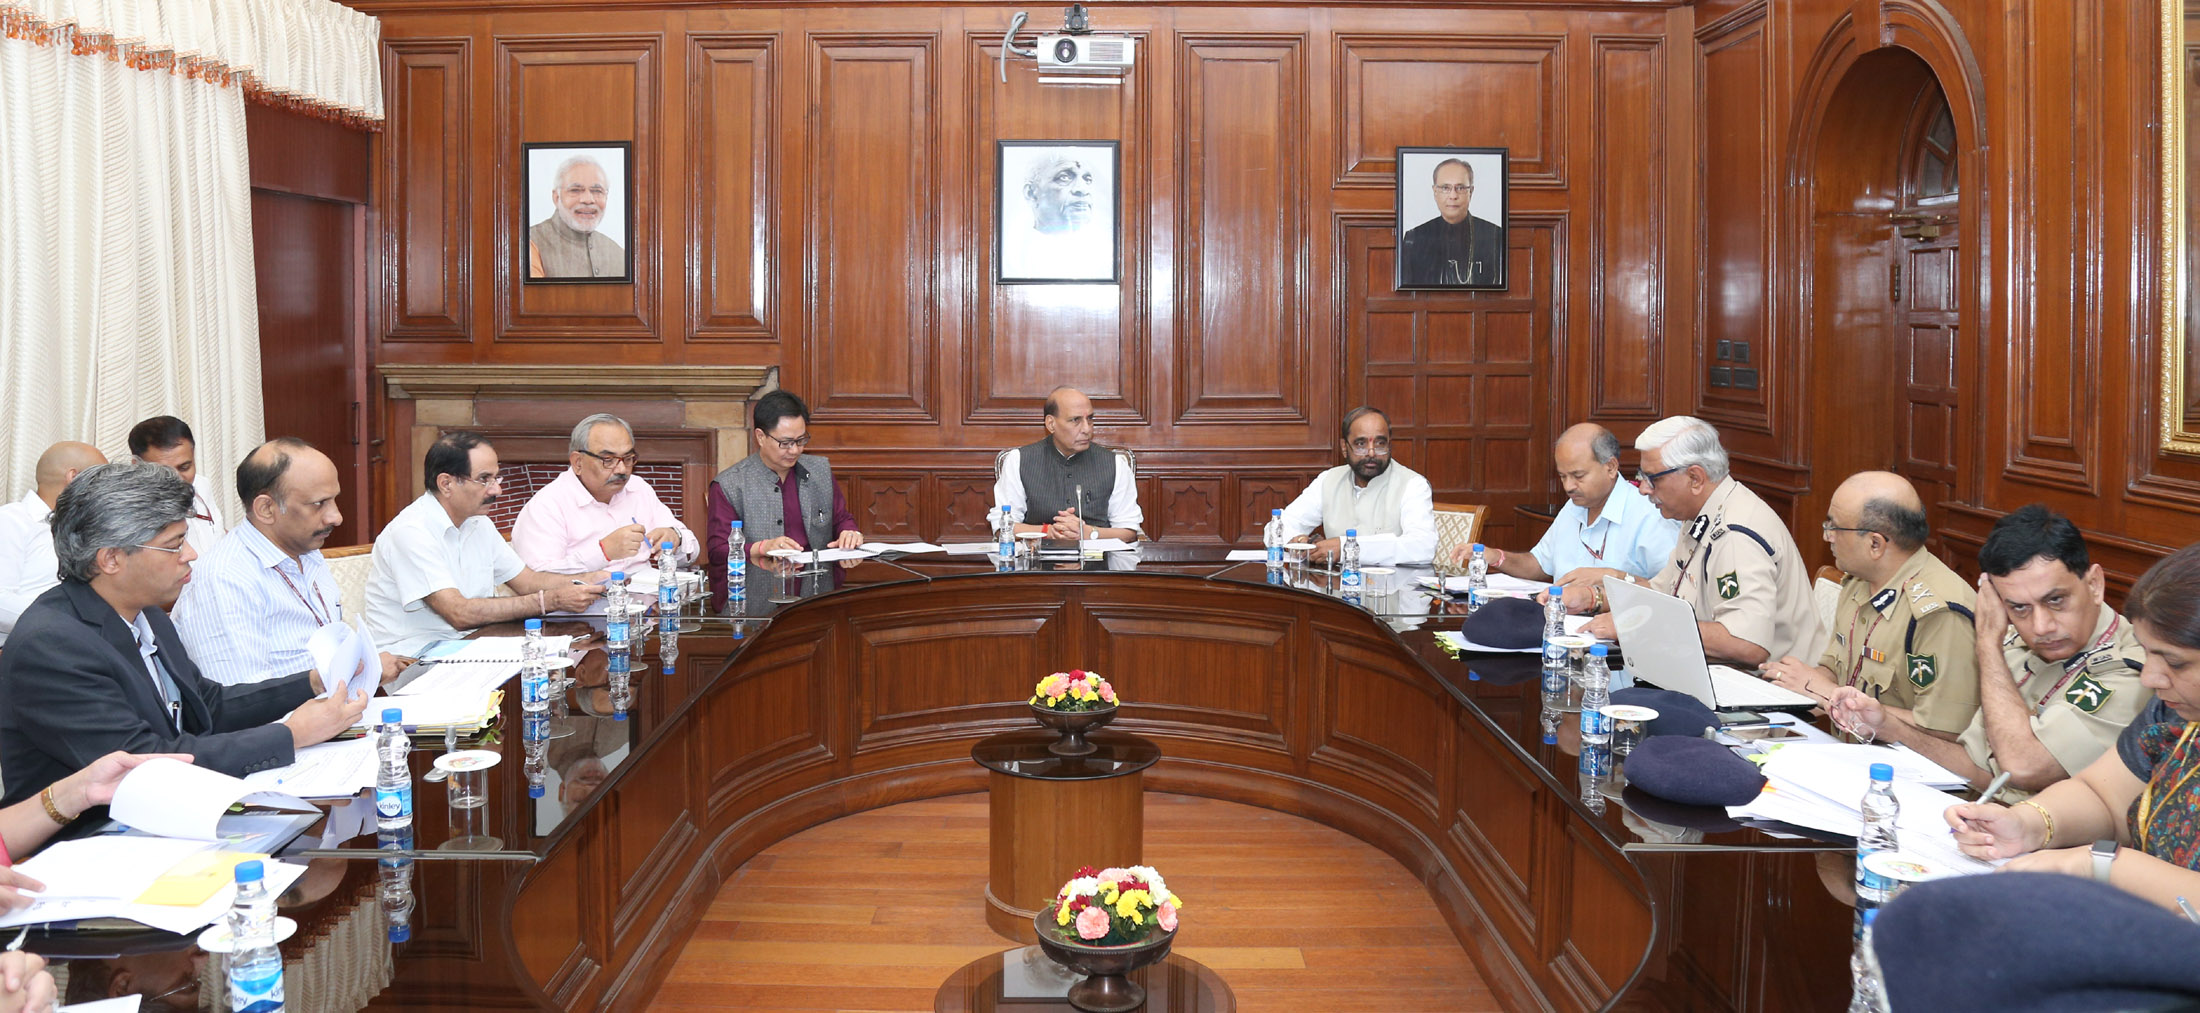 The Union Home Minister, Shri Rajnath Singh reviewing the issues of Indo Tibetan Border Police (ITBP) in a meeting, in New Delhi on September 30, 2016.  The Ministers of State for Home Affairs, Shri Hansraj Gangaram Ahir and Shri Kiren Rijiju, the Union Home Secretary, Shri Rajiv Mehrishi, the Secretary (Border Management), Shri Susheel Kumar, the Director General, ITBP, Shri D.K. Chaudhary and senior officers from ITBP and MHA are also seen.